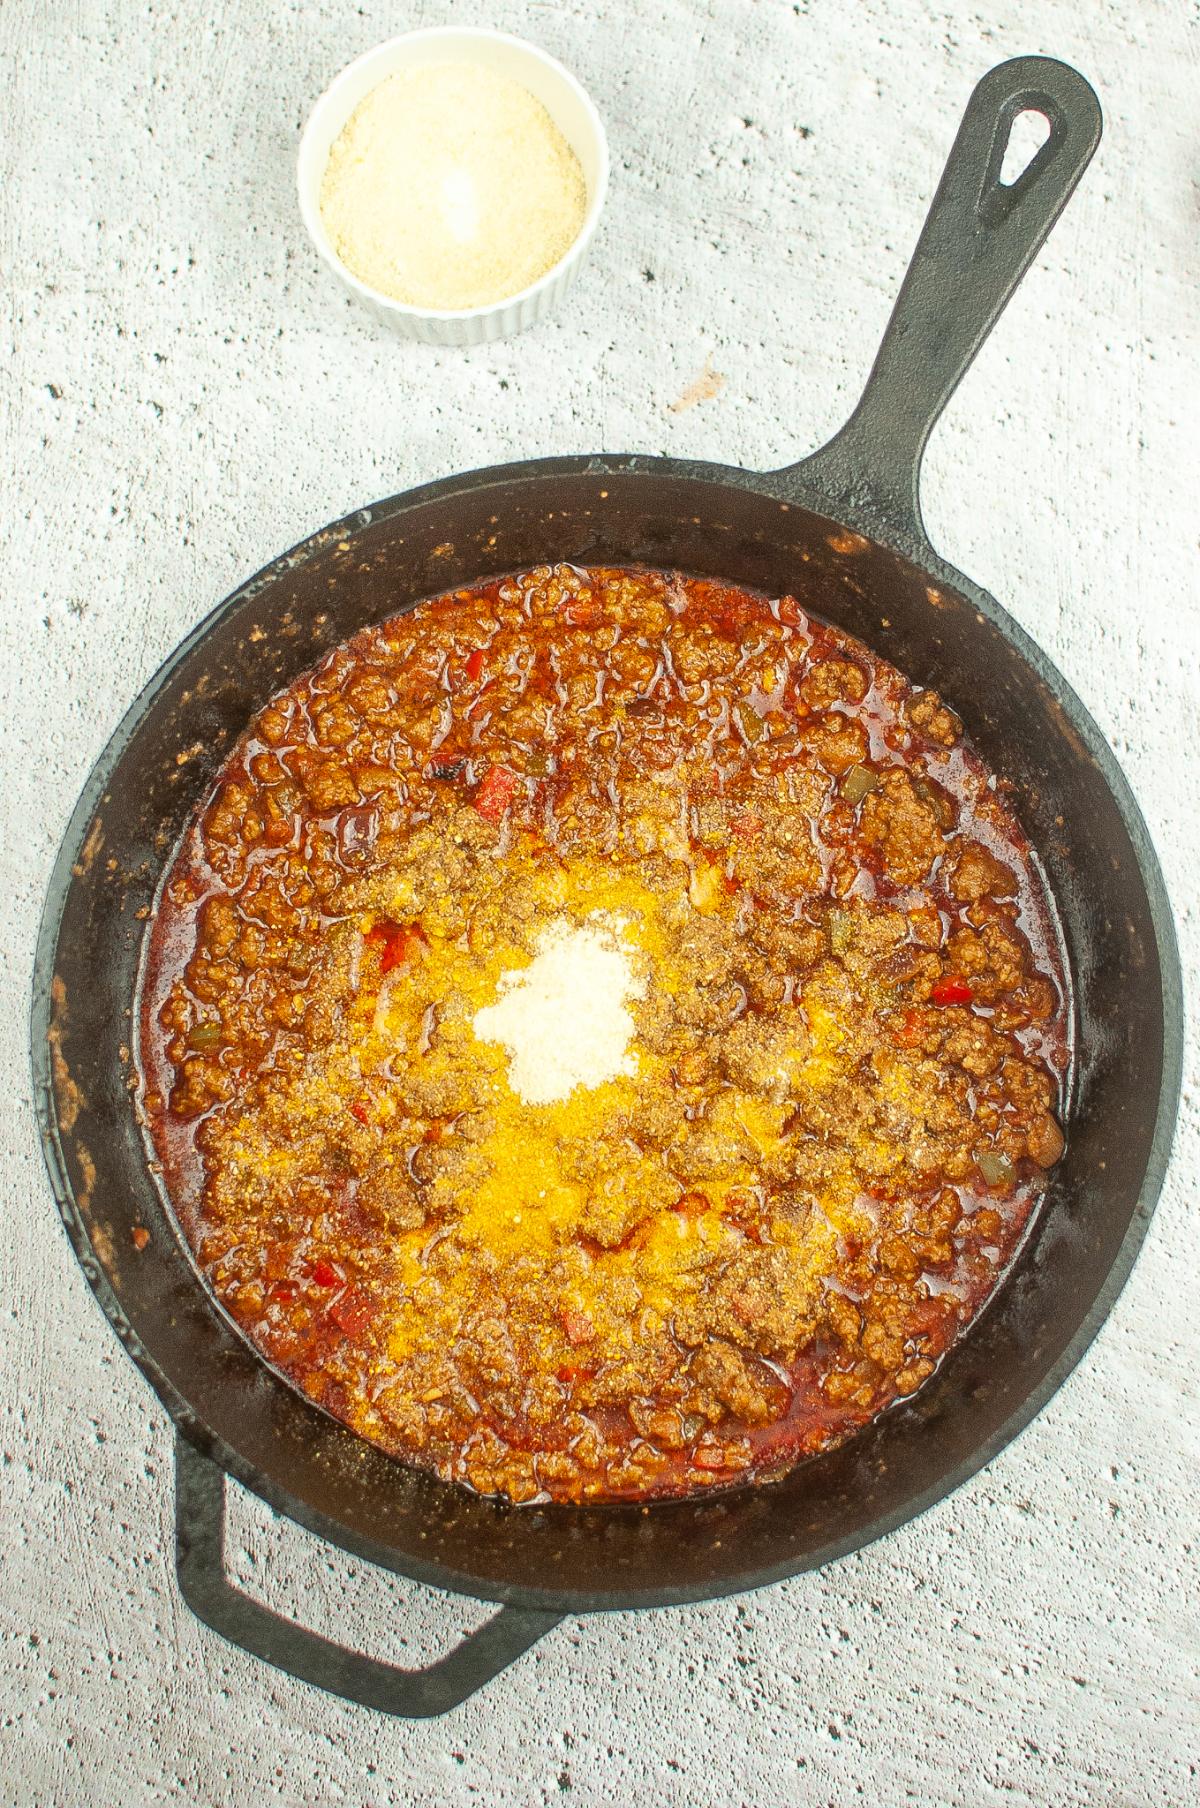 Masa harina is added to the ground beef mixture.